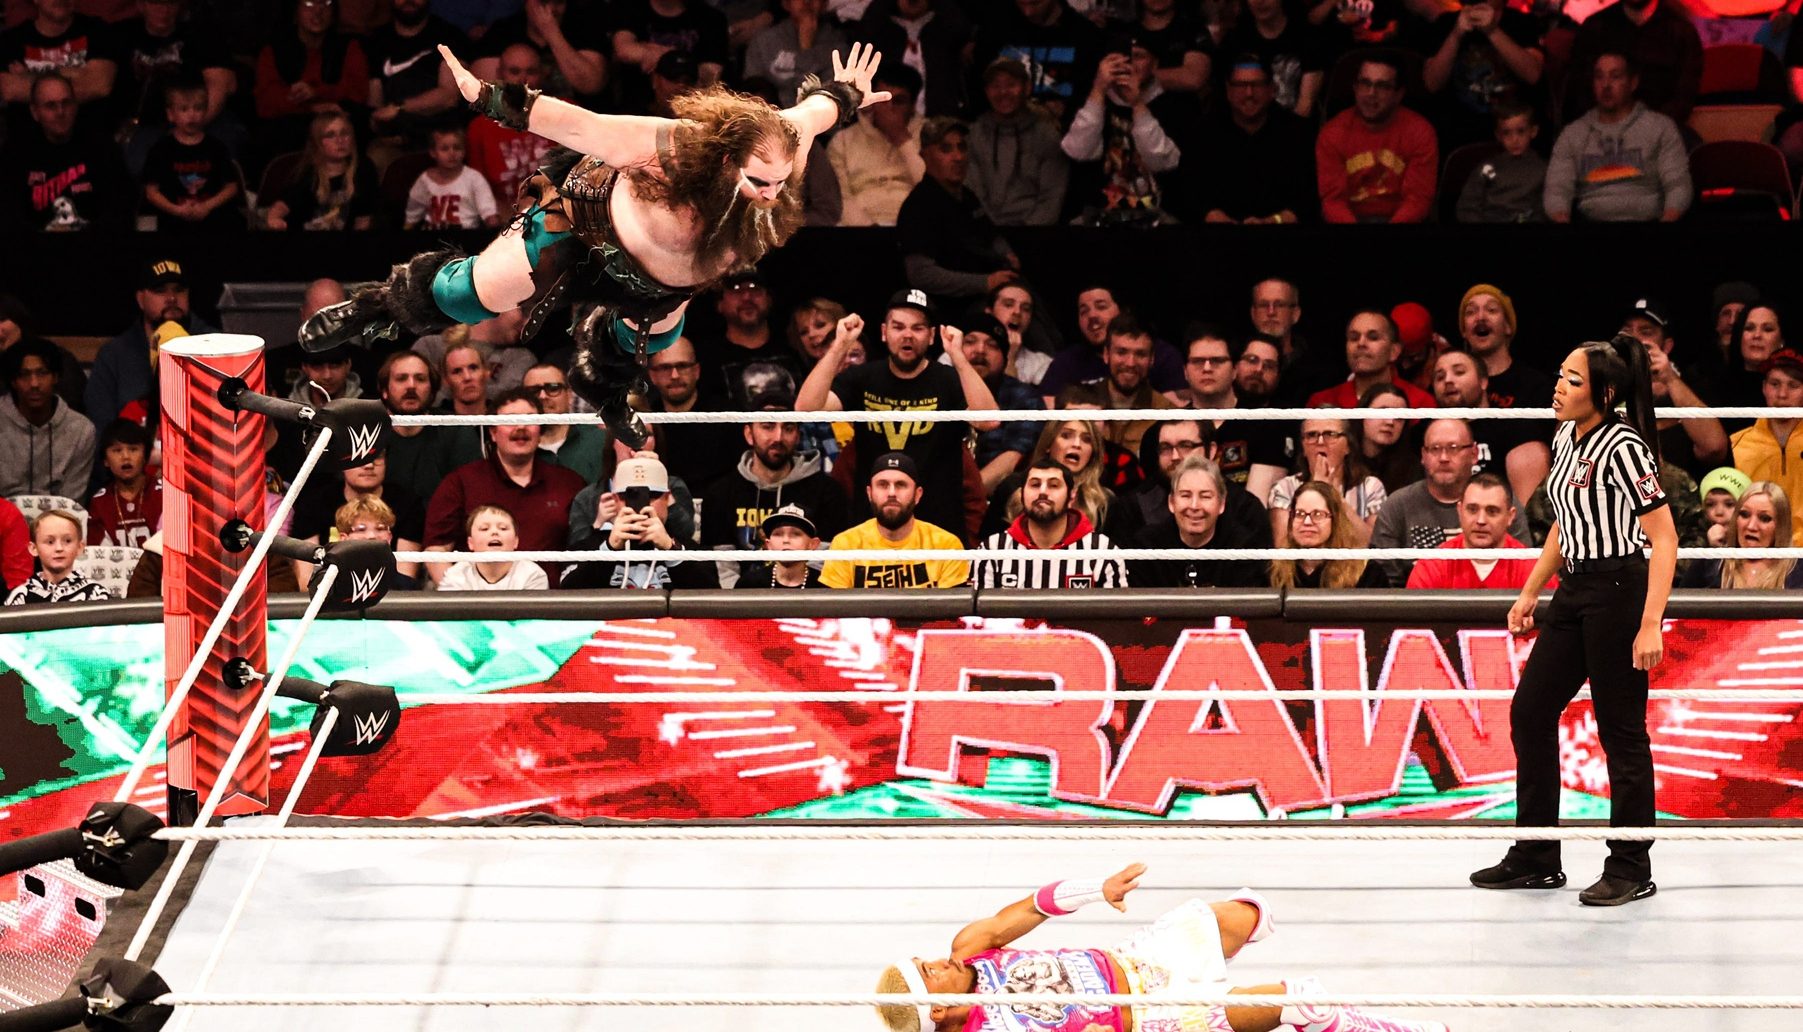 Ivar leaps off the top rope on top of Akira Tozawa during "WWE Monday Night Raw" at Wells Fargo Arena in Des Moines.